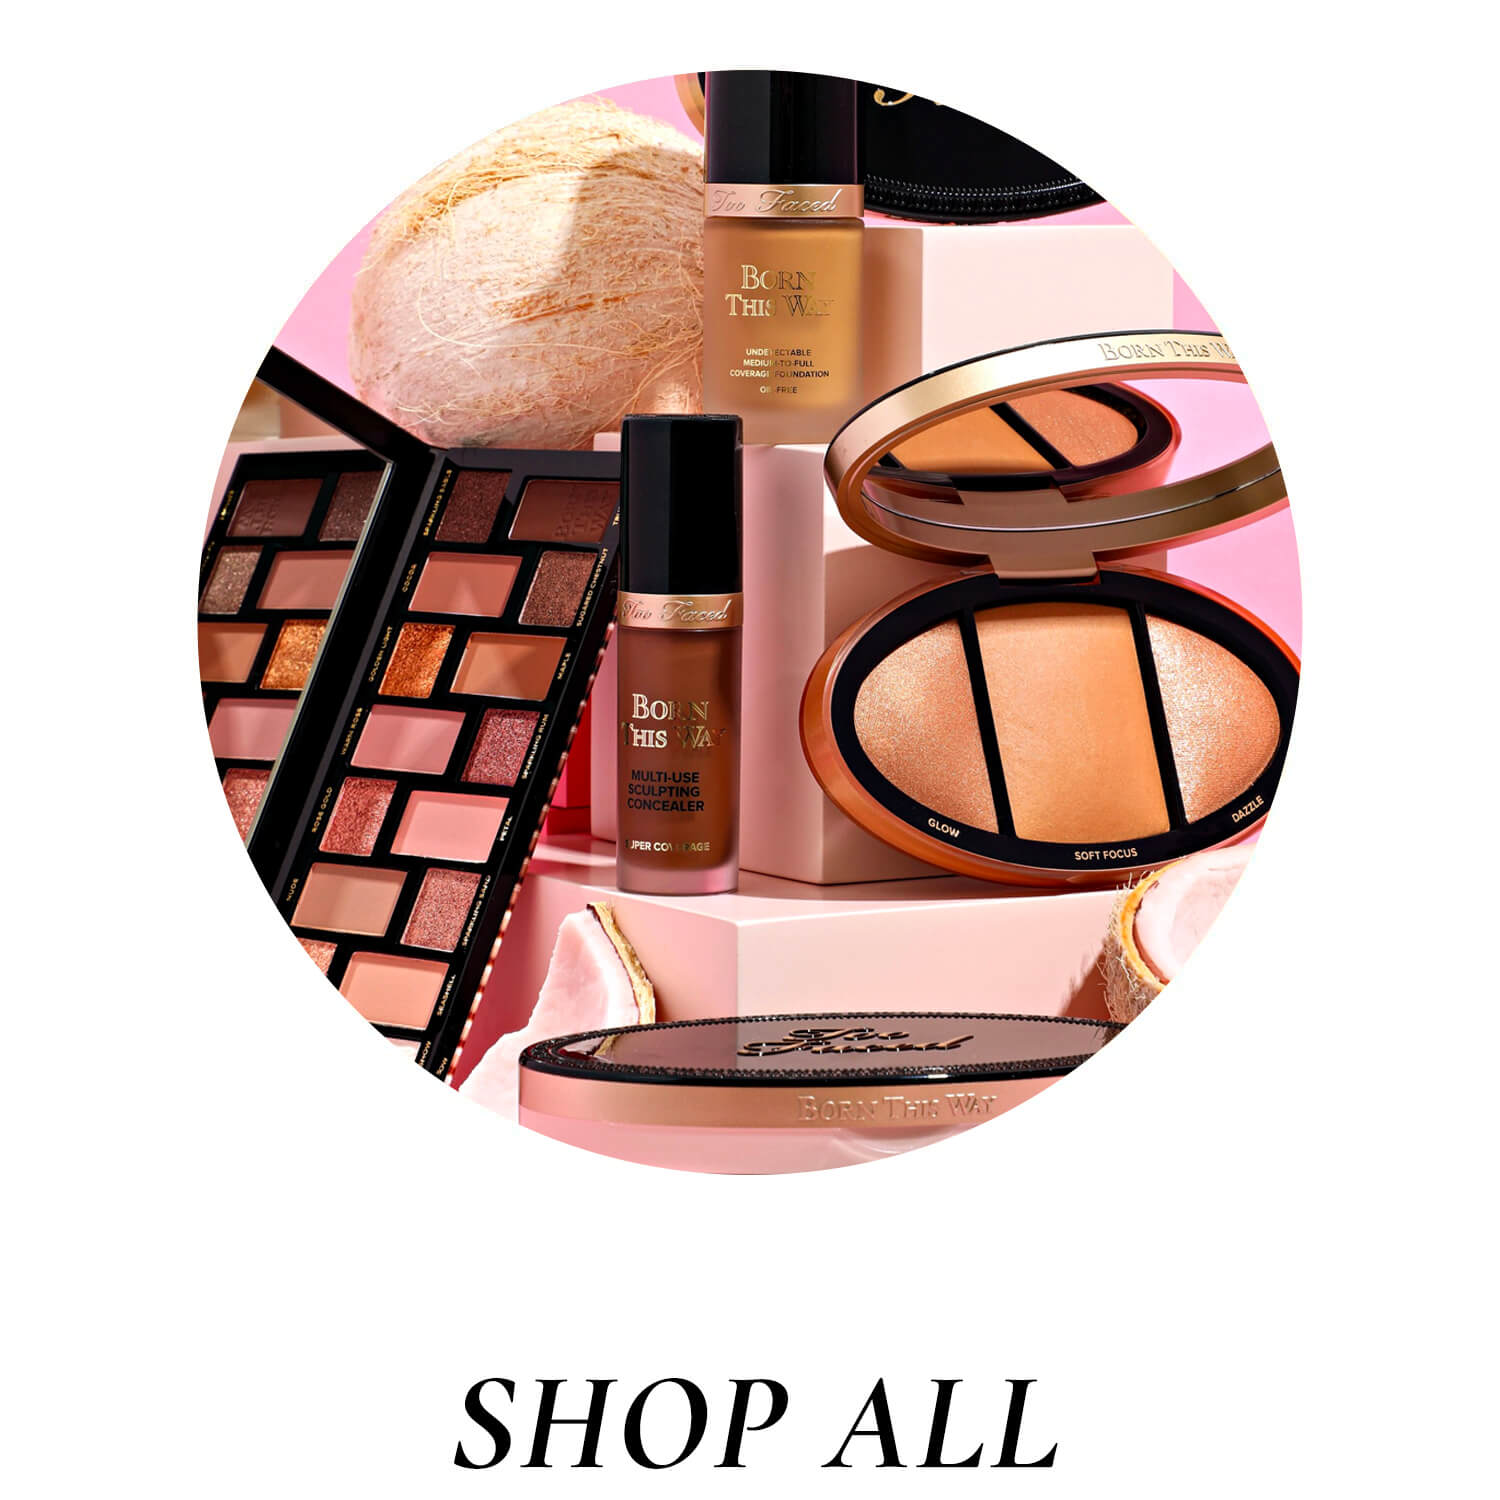 SHOP TOO FACED BY CATEGORY